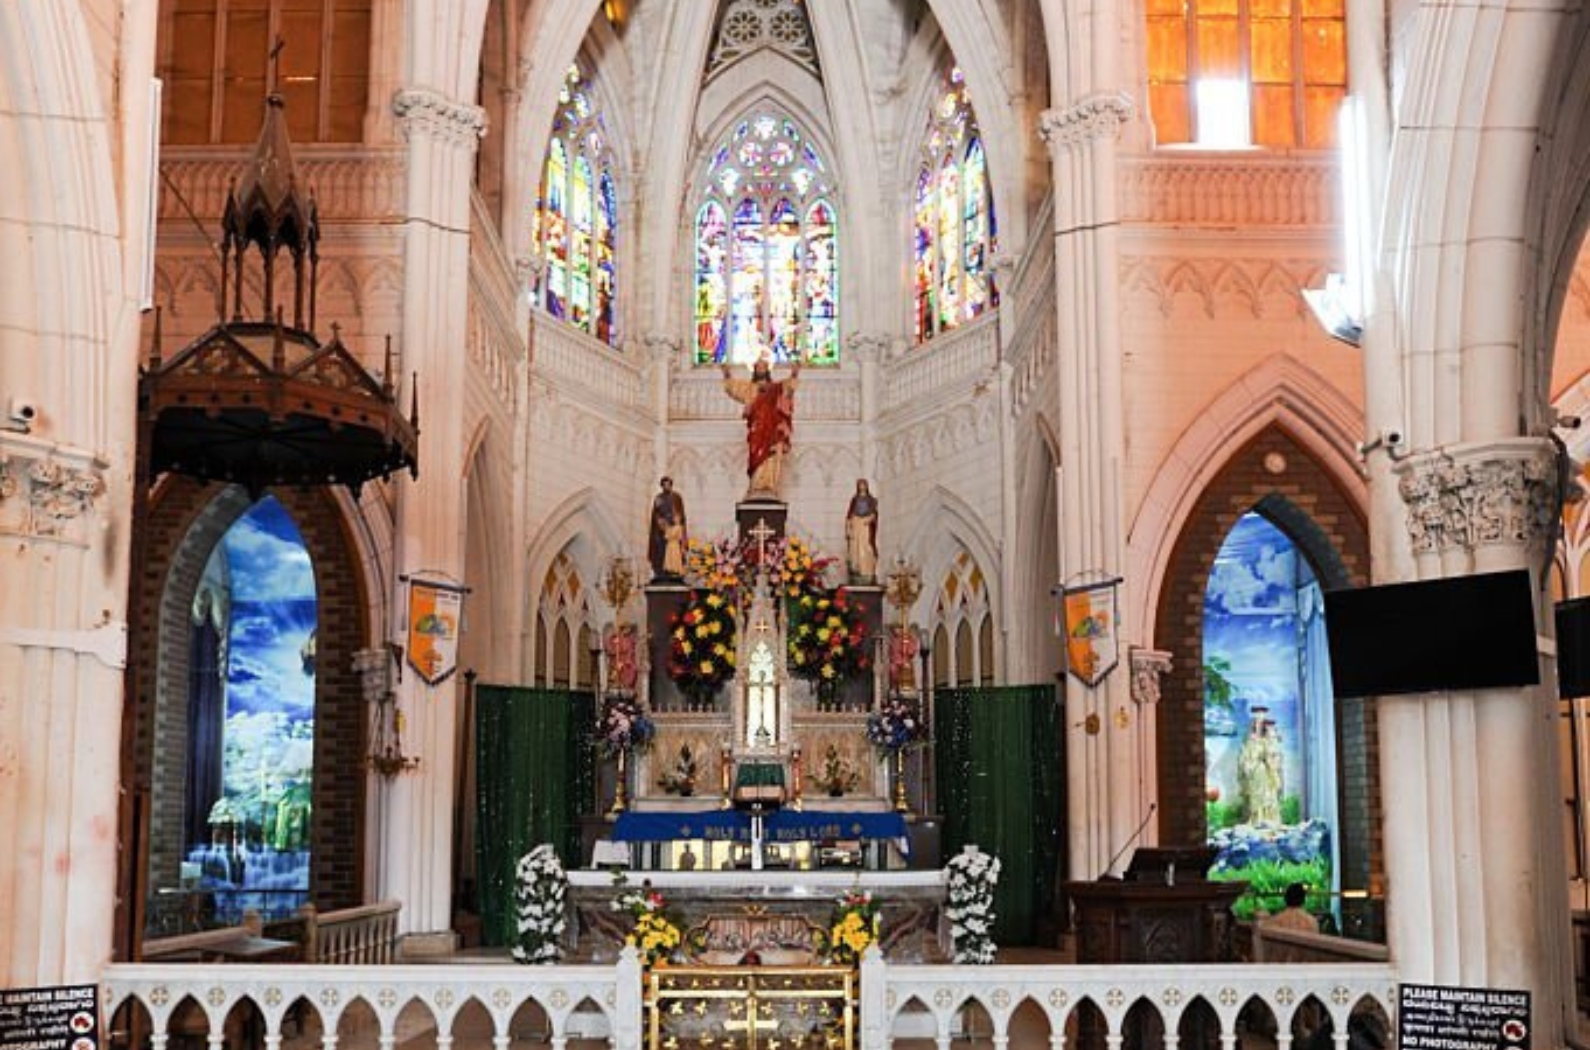 Beautiful Inside View of St. Philomena's Catherdral, Mysore.